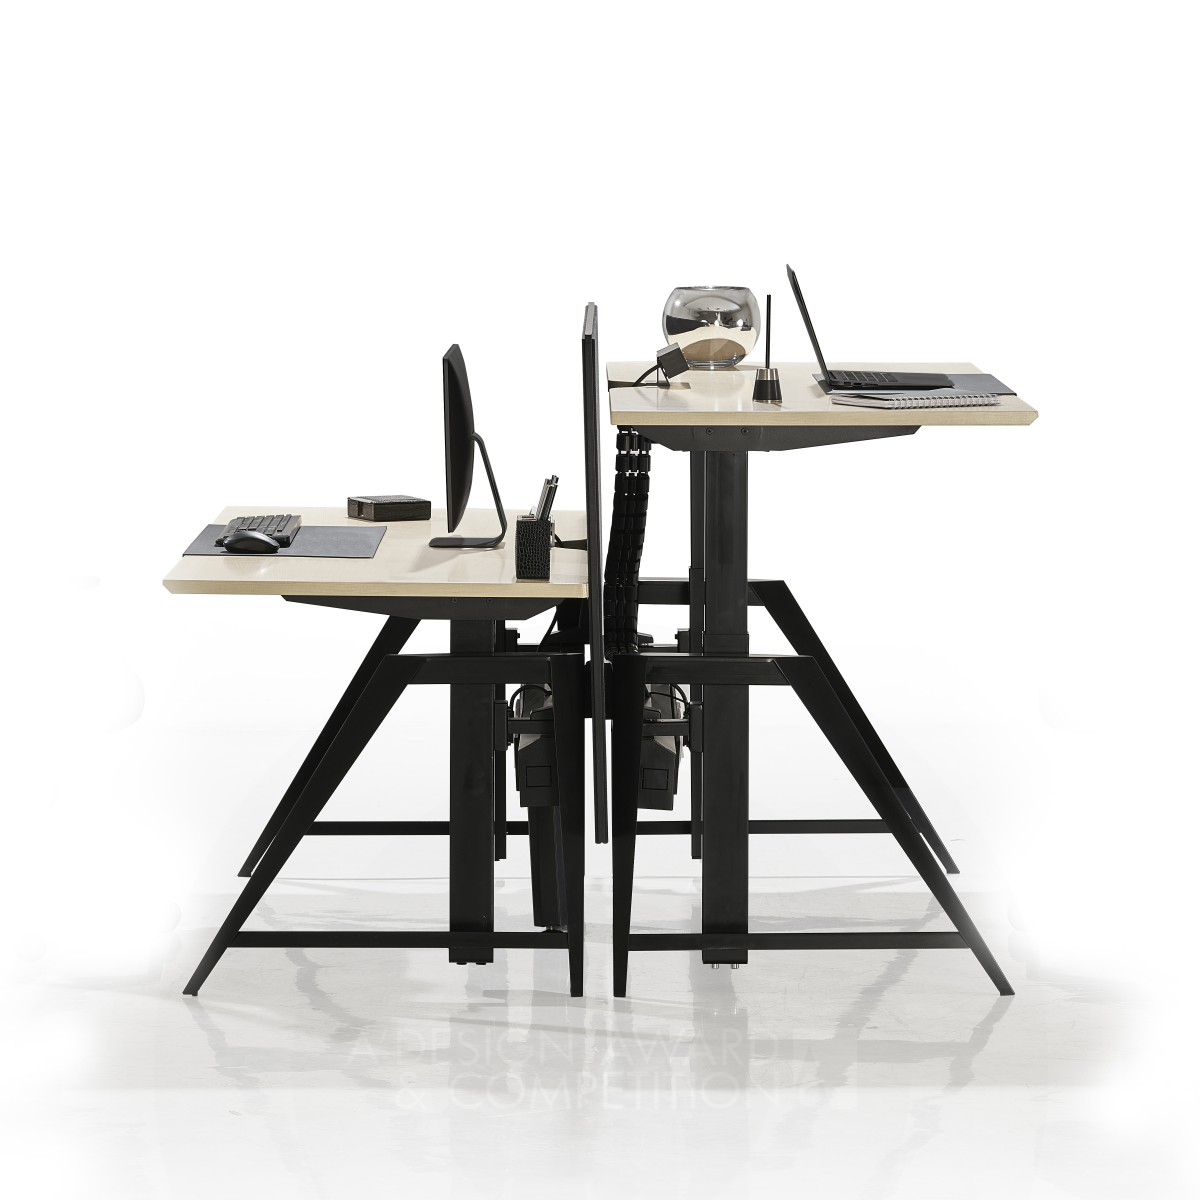 Stealth Height Adjustable Table by Featherlite